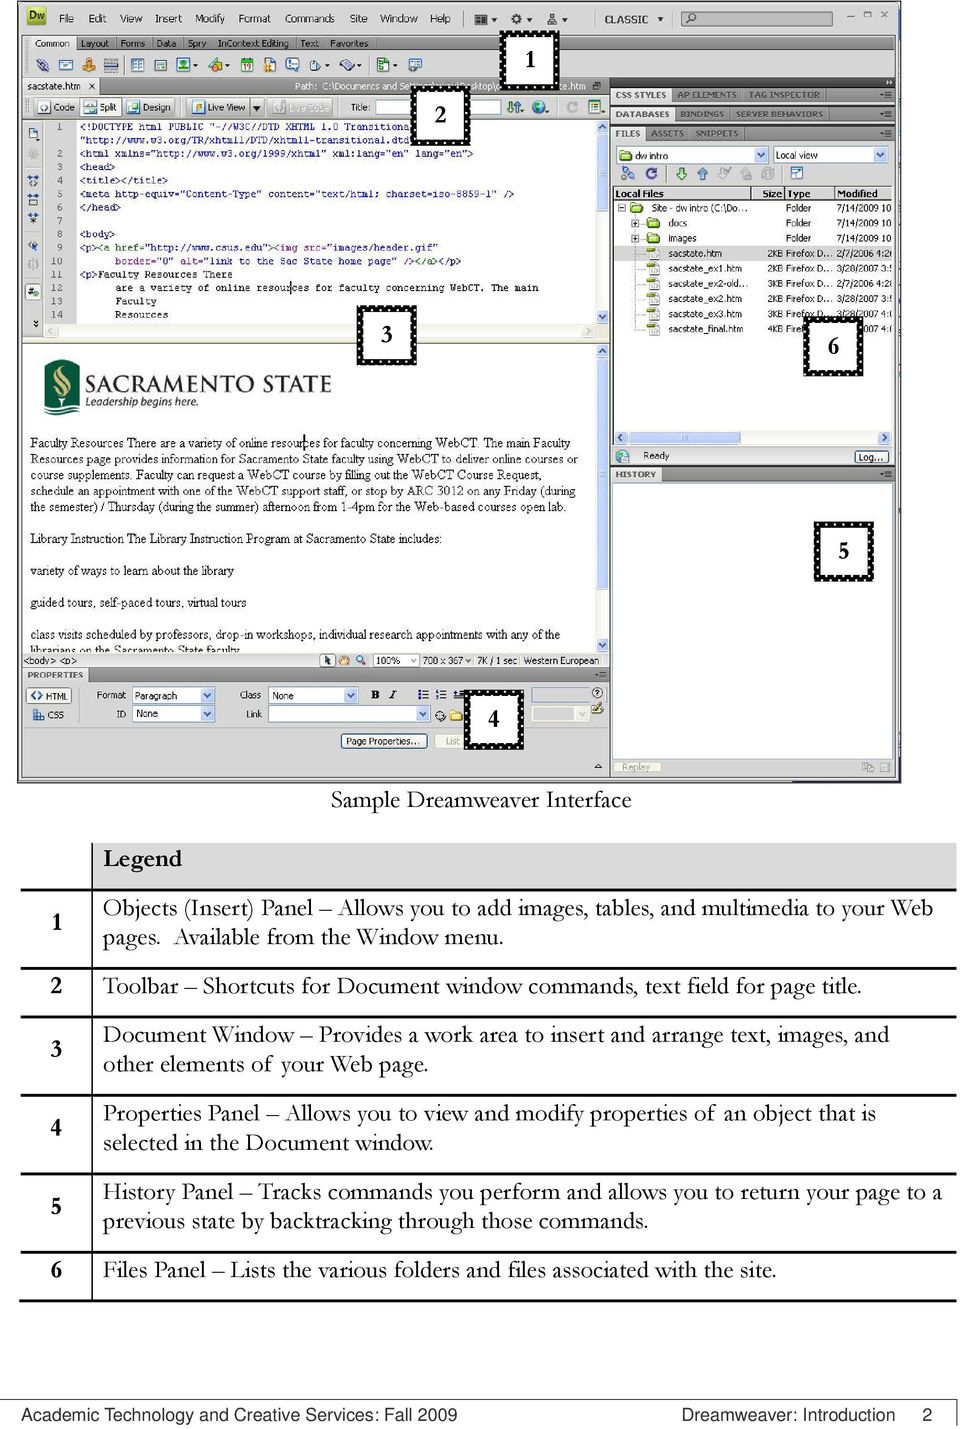 Properties Panel Allows you to view and modify properties of an object that is selected in the Document window.